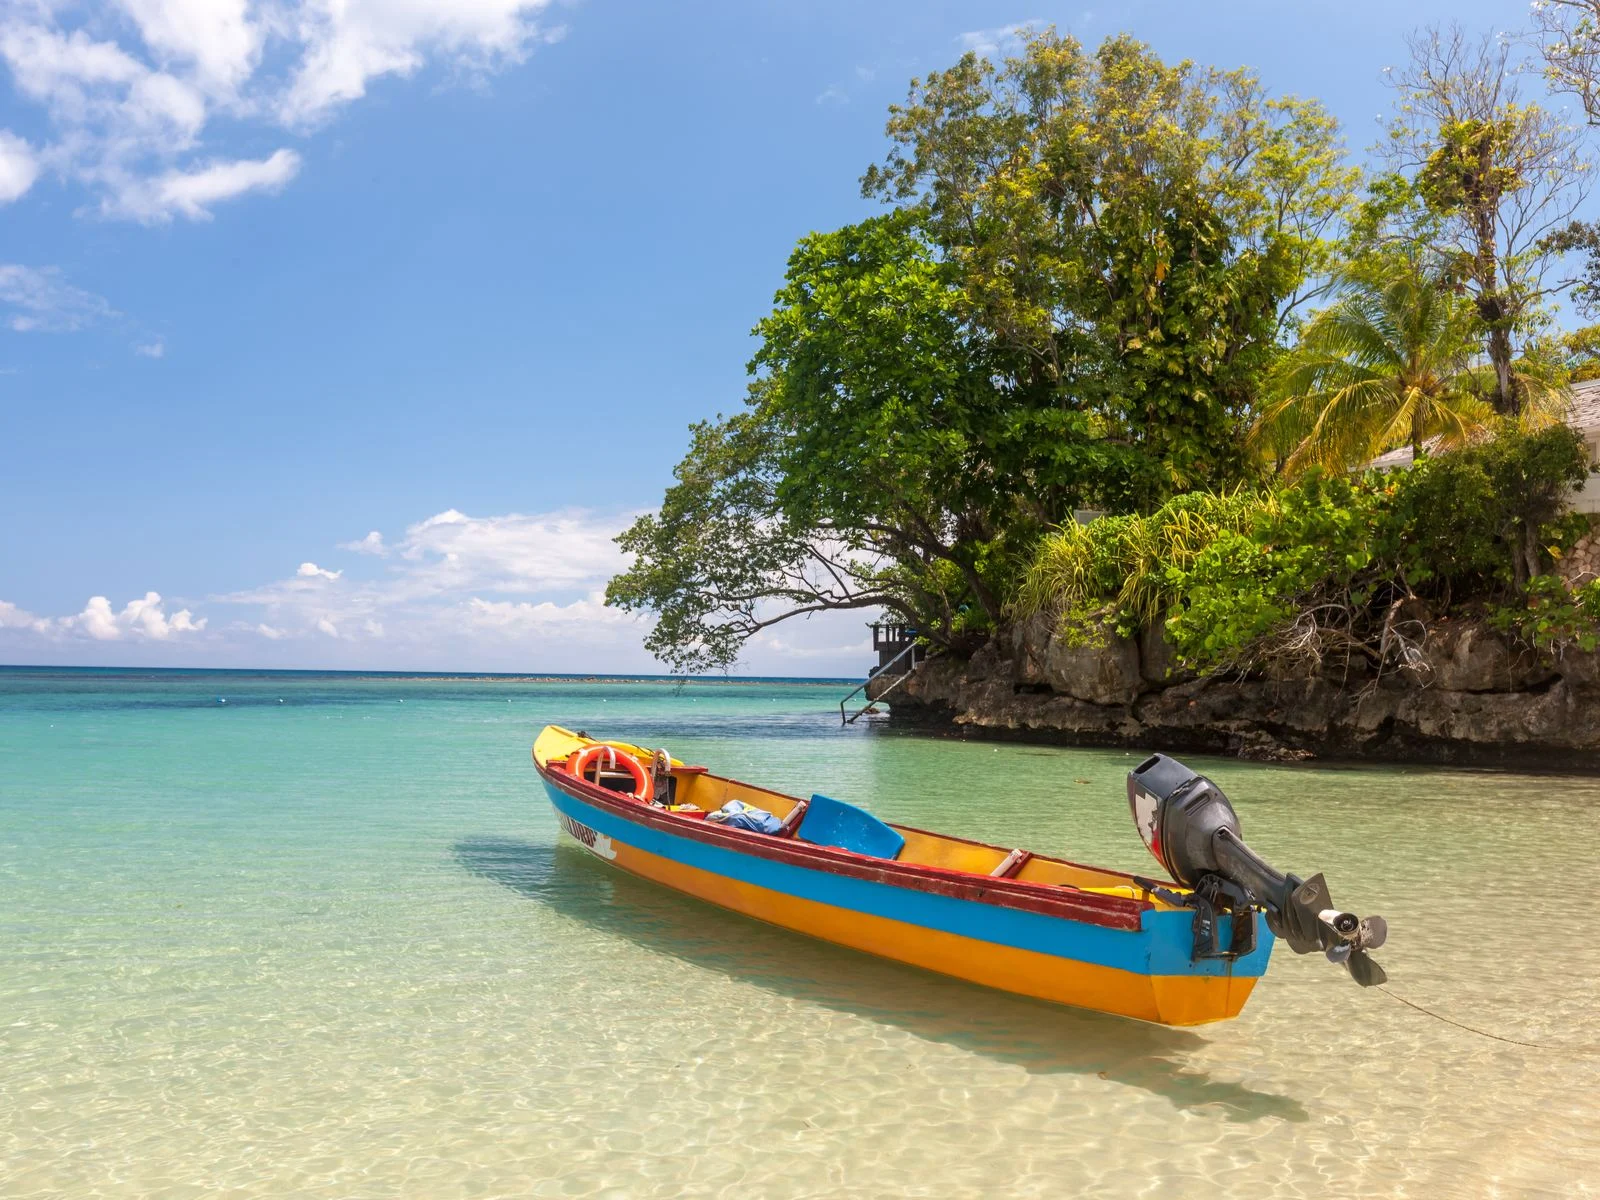 Boat floating on the crystal-clear ocean water during the cheapest time to visit Jamaica